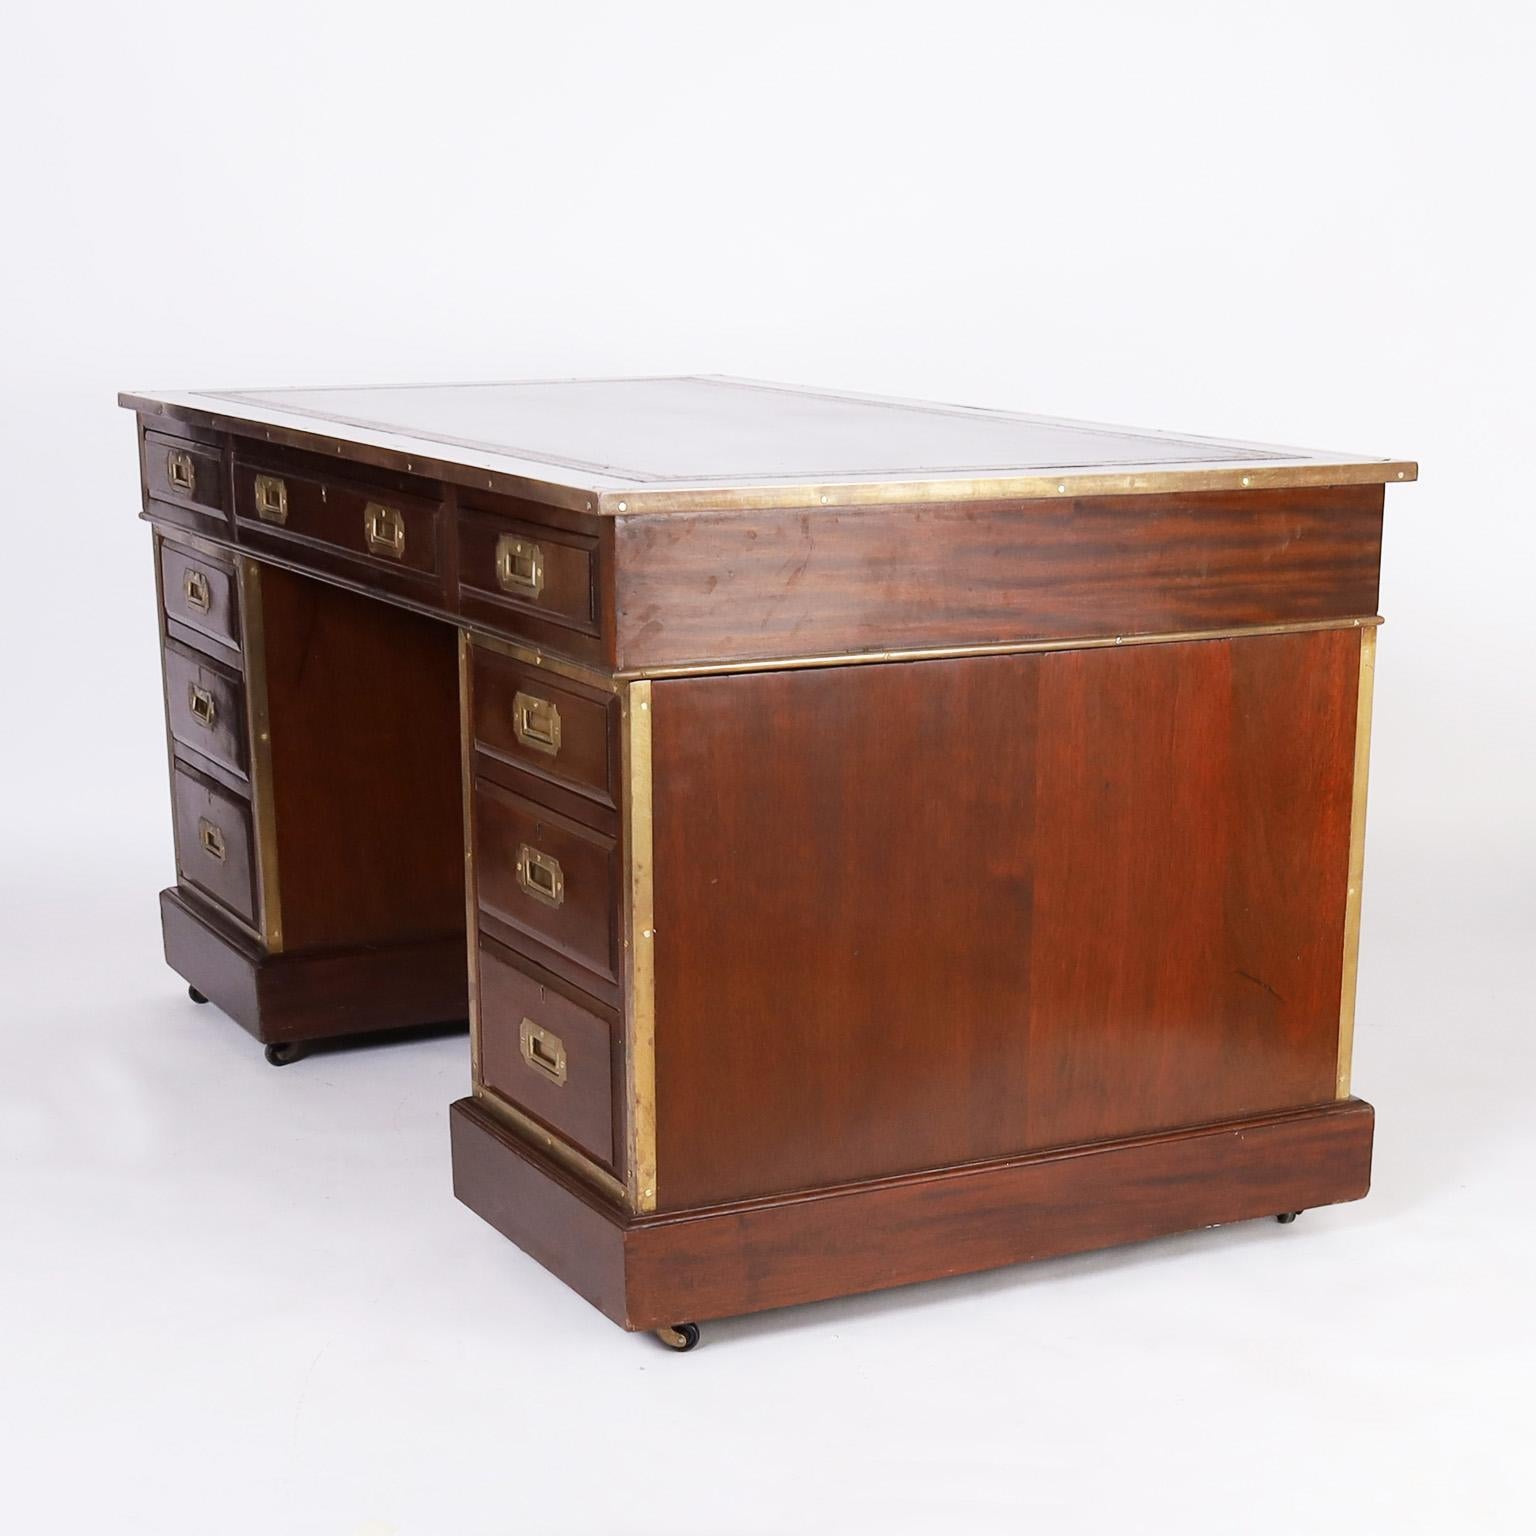 Hand-Crafted English Leather Top Campaign Desk